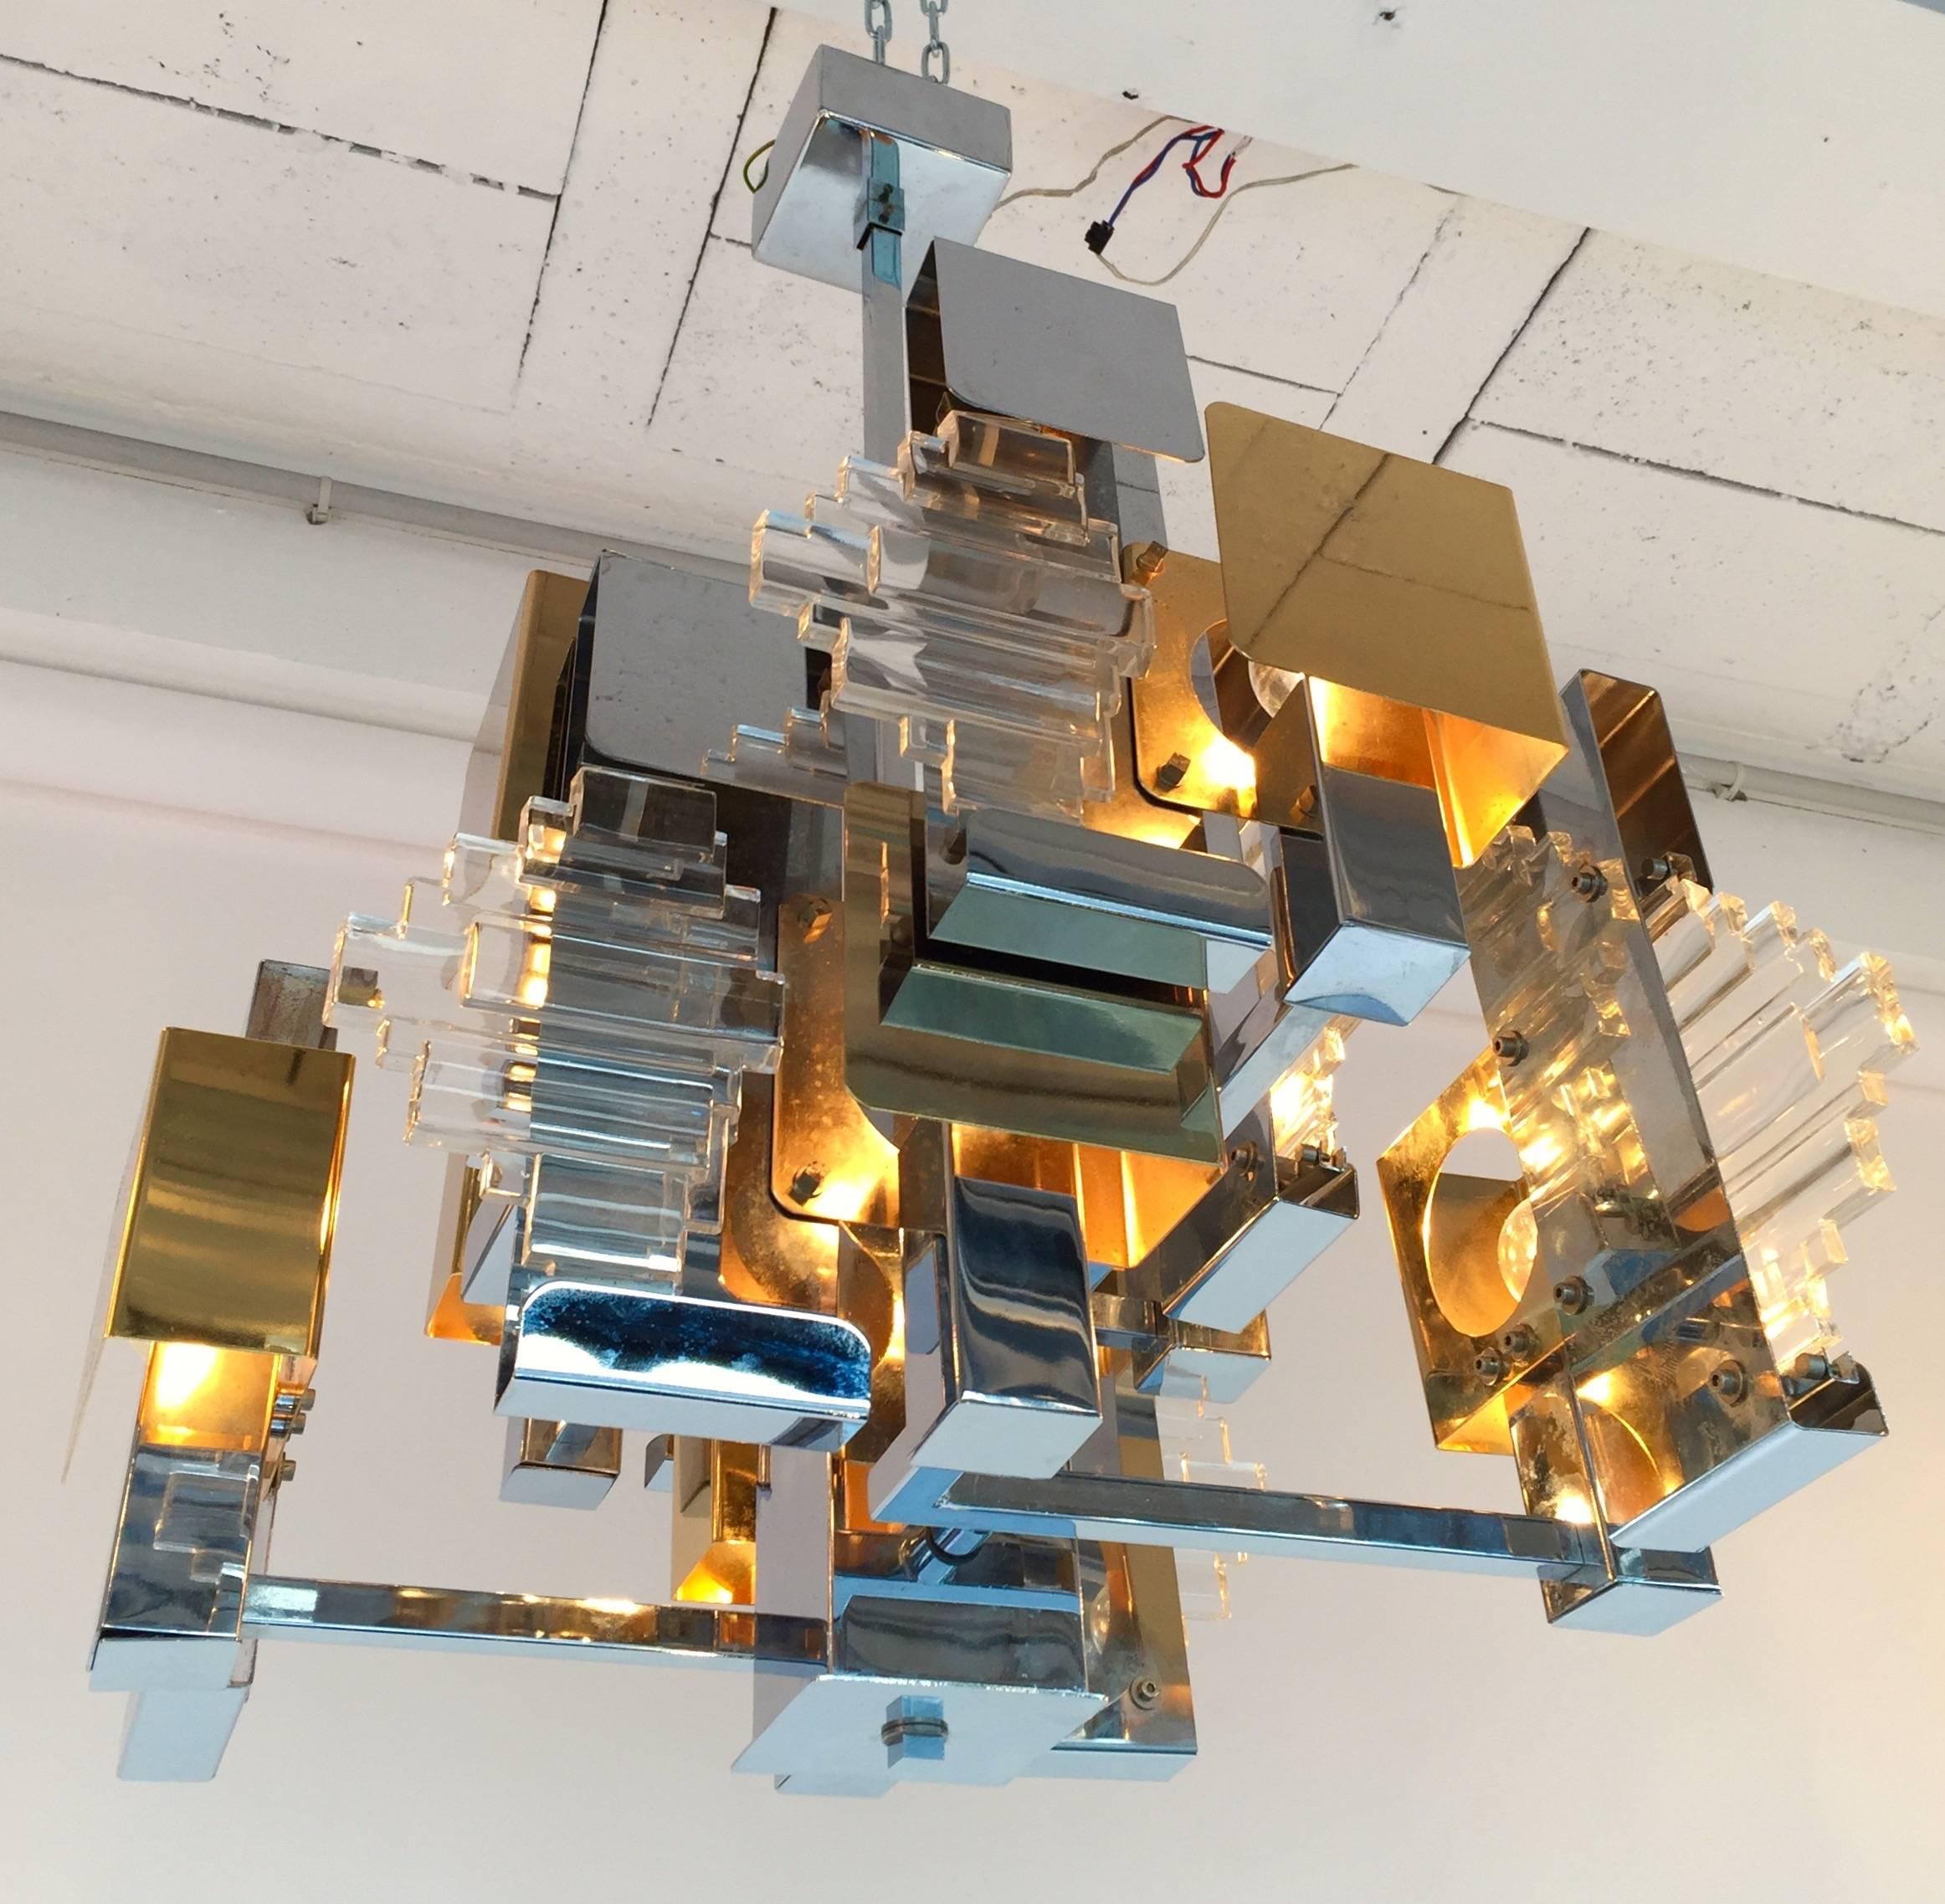 Rare chandelier or ceiling pendant light by the designer Gaetano Sciolari. Small really interesting model by is complexity of composition. Chrome, brass and glass. Very modernist and sculptural.
Sciolari is a famous manufacture like Reggiani,